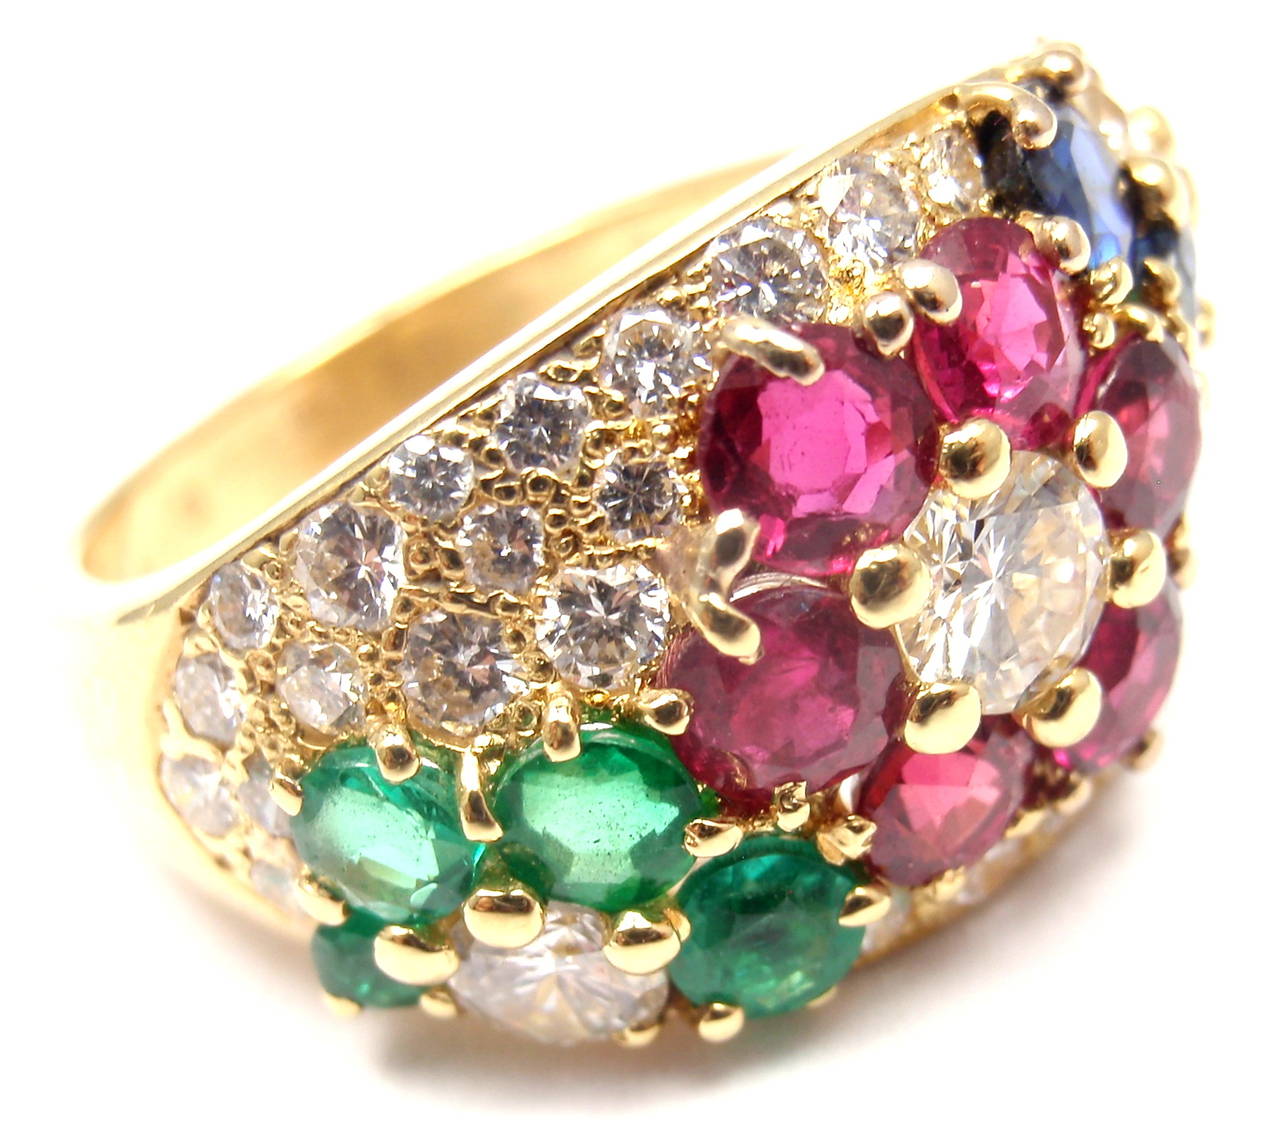 18k Yellow Gold Ring by Van Cleef & Arpels. 
With 34 diamonds at approximately 1.25ct total weight. VVS1 clarity, G color
4 sapphires at approximately .50ct total weight
4 emeralds at approximately .50ct total weight
6 rubies at approximately